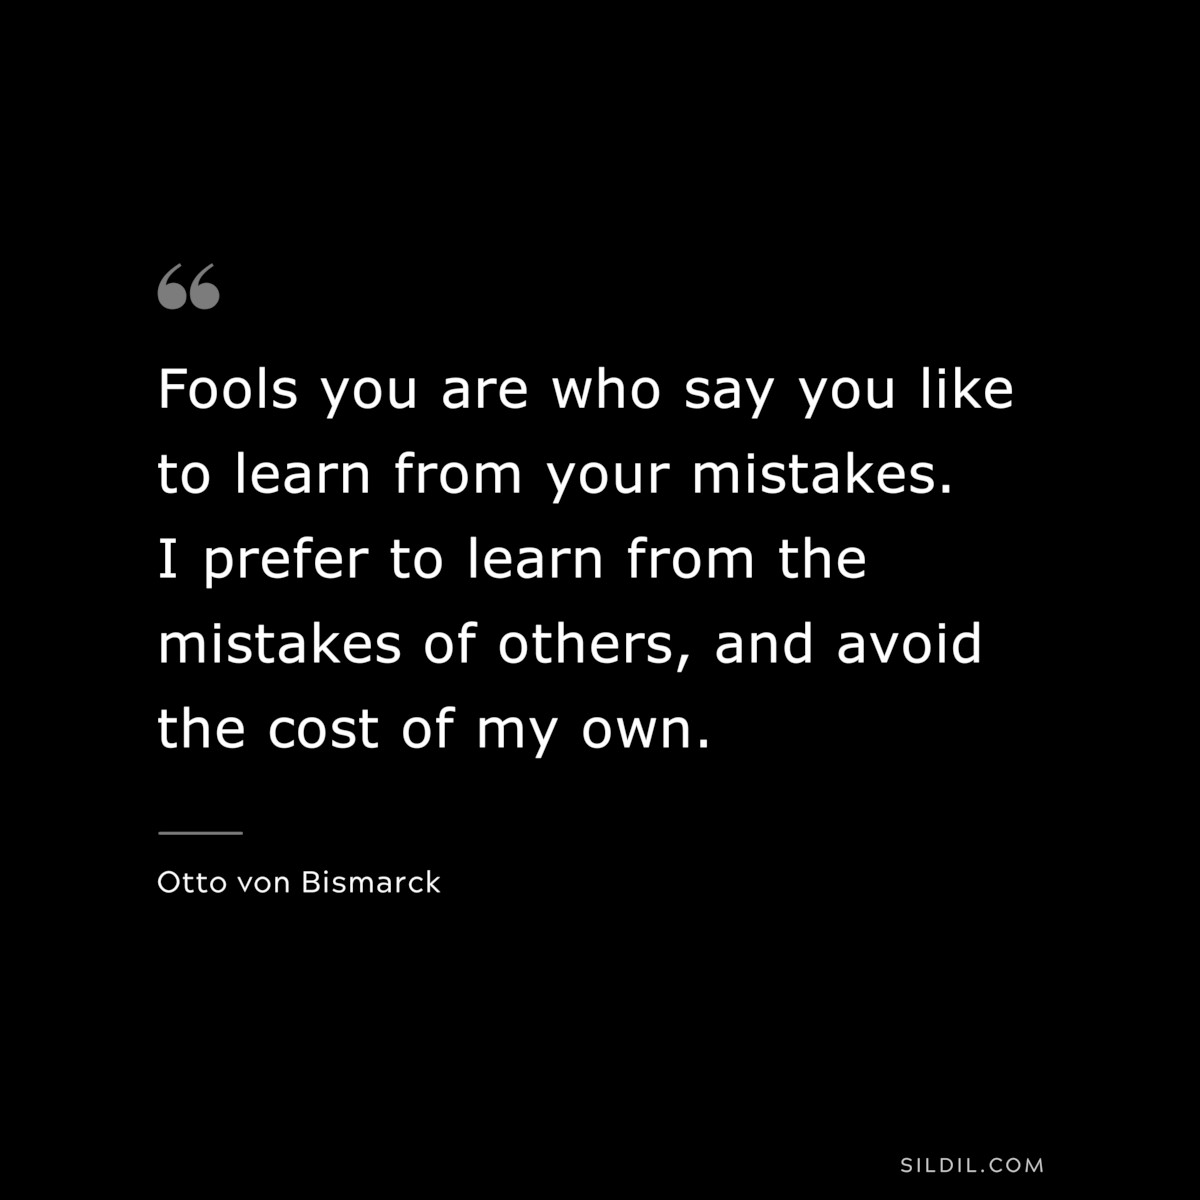 Fools you are who say you like to learn from your mistakes. I prefer to learn from the mistakes of others, and avoid the cost of my own. ― Otto von Bismarck